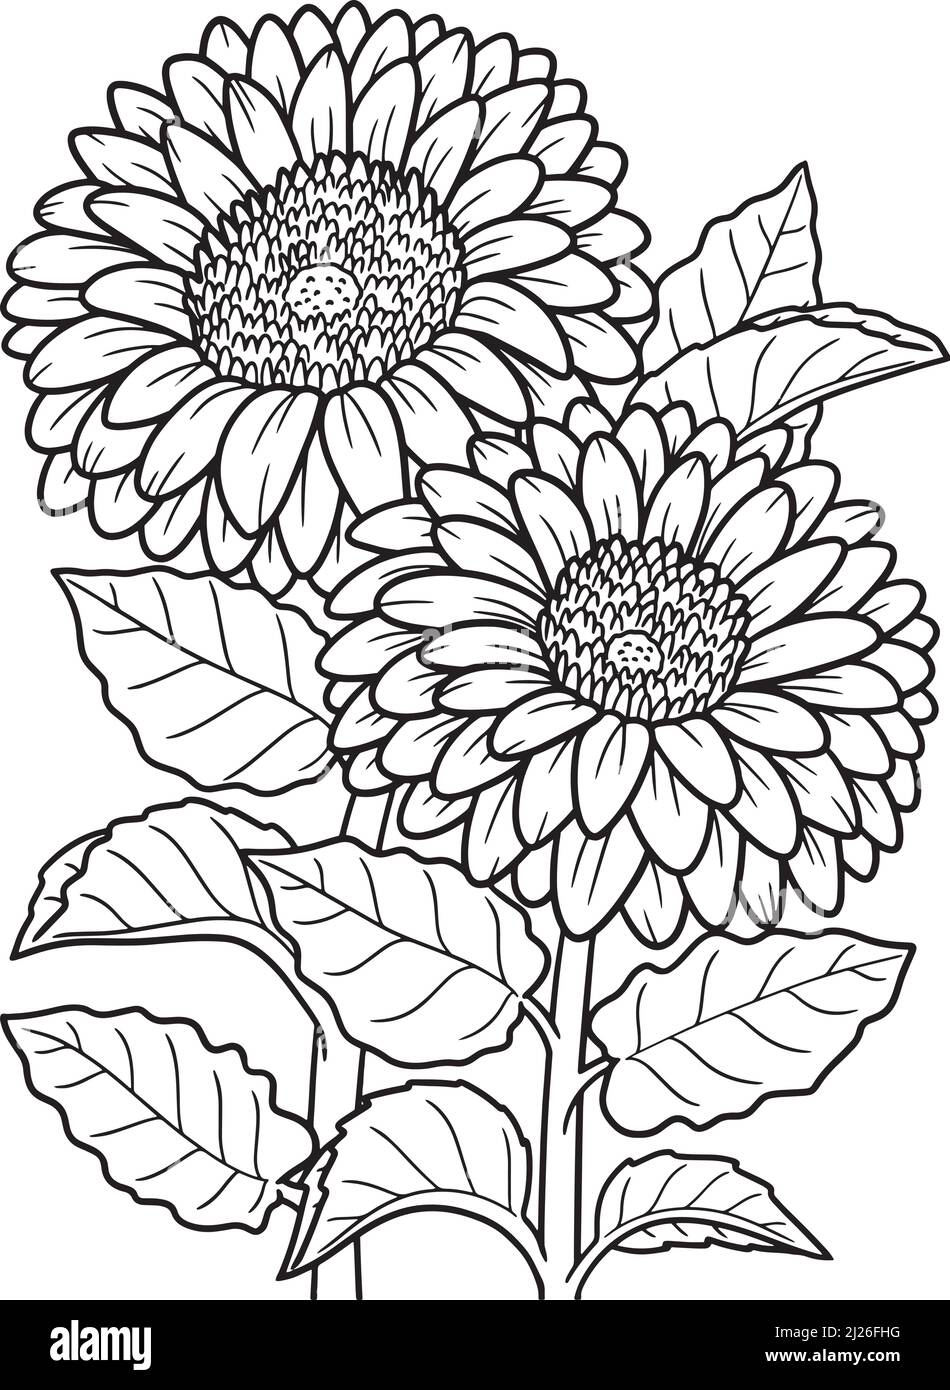 Gerbera Flower Coloring Page for Adults Stock Vector